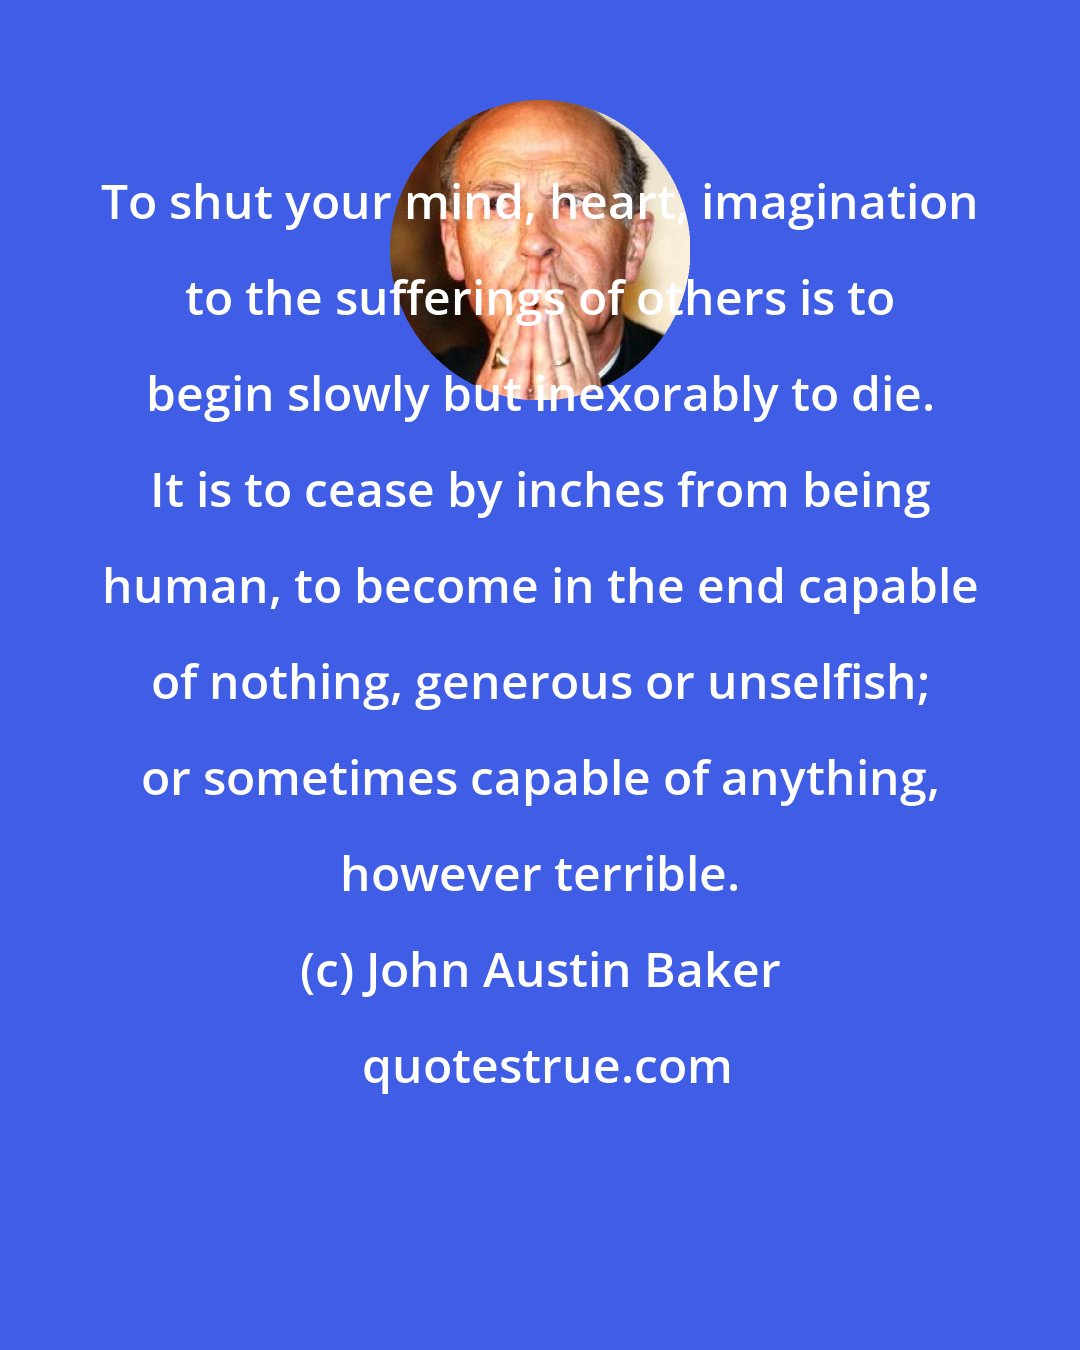 John Austin Baker: To shut your mind, heart, imagination to the sufferings of others is to begin slowly but inexorably to die. It is to cease by inches from being human, to become in the end capable of nothing, generous or unselfish; or sometimes capable of anything, however terrible.